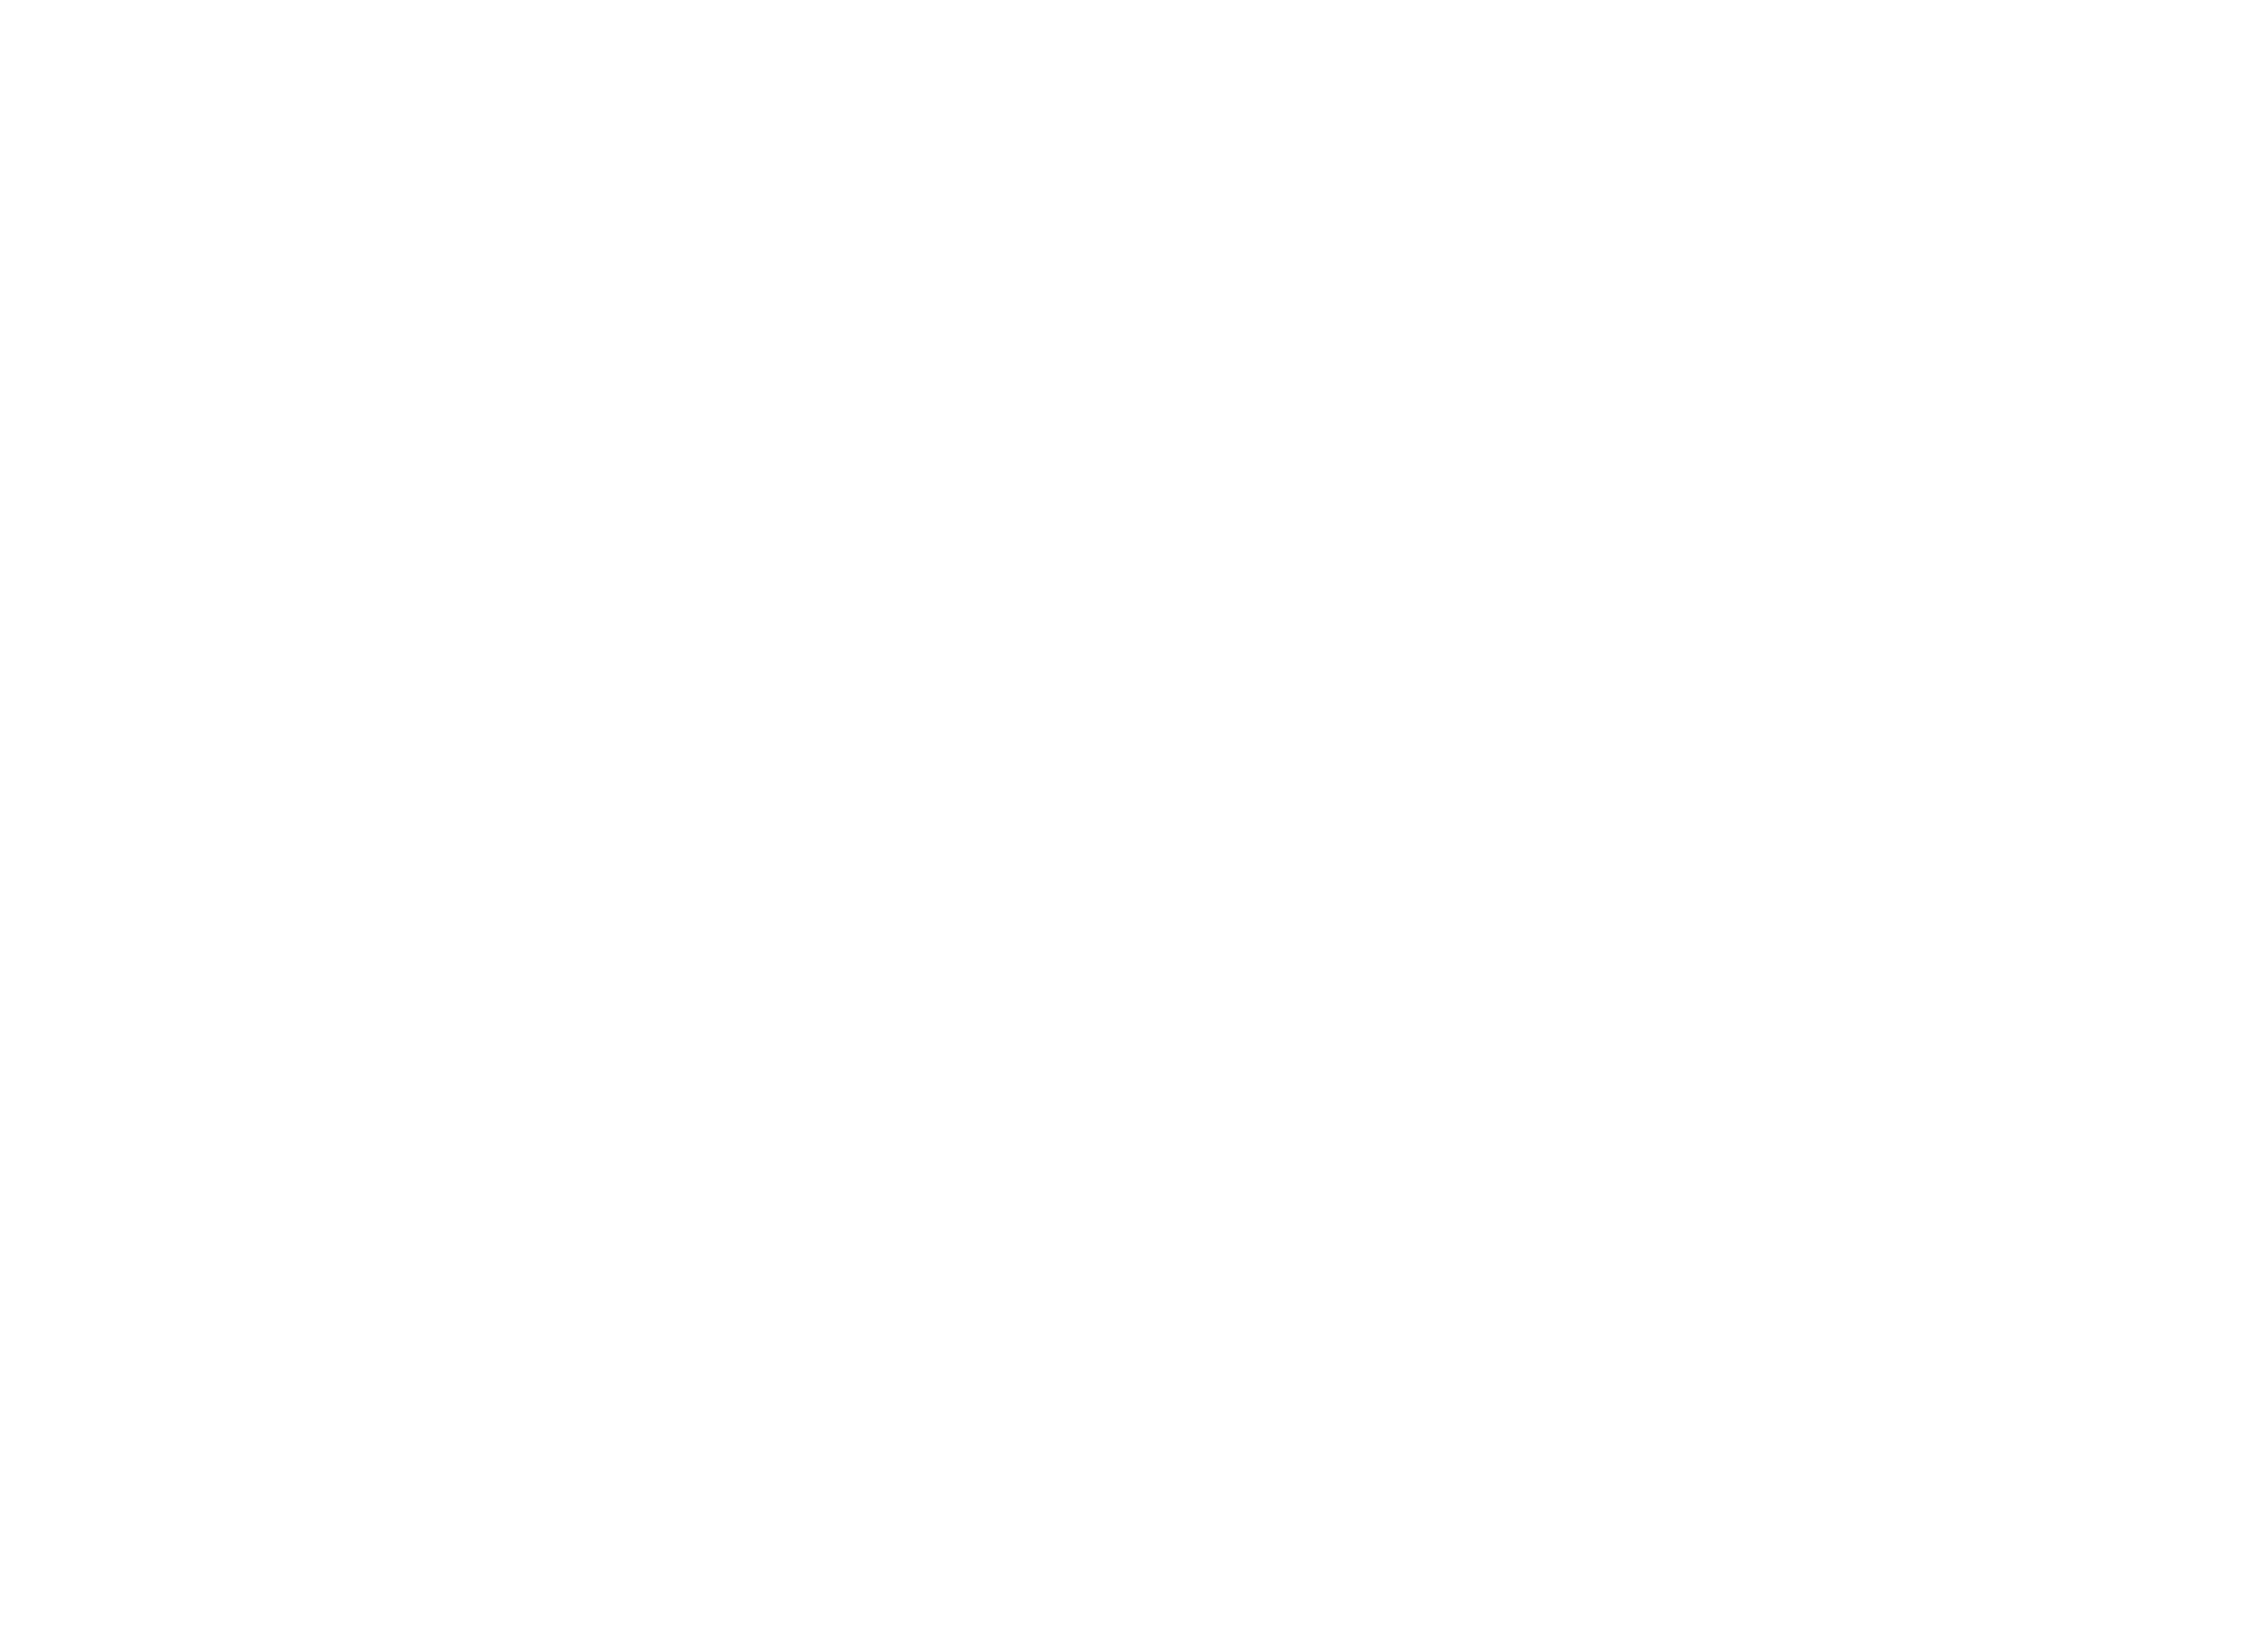 Fxm Logo - Fearless | FX Networks